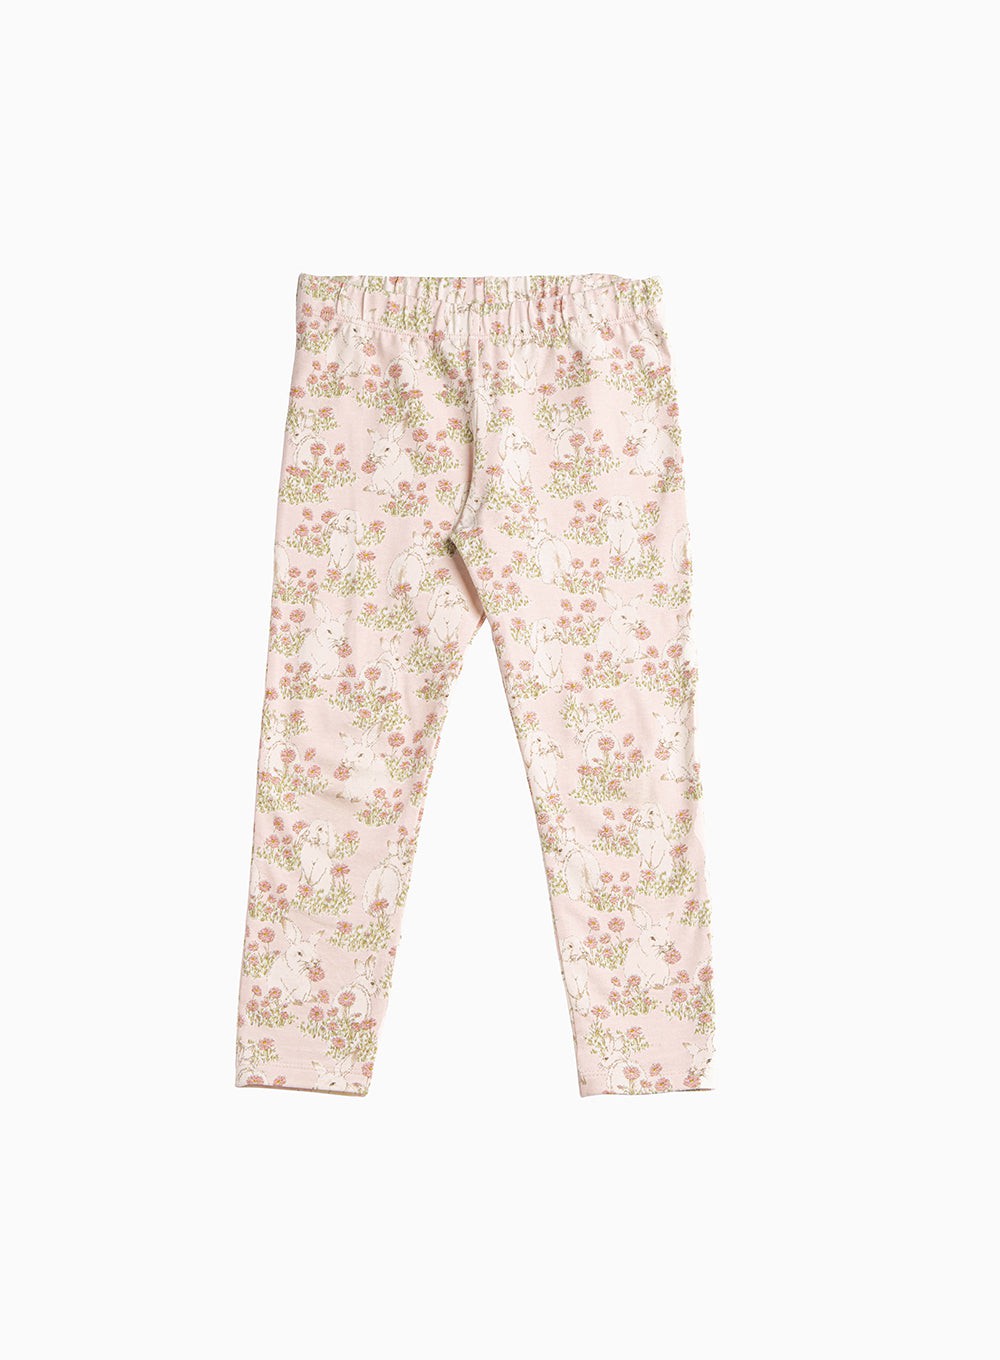 Pink Horse Cotton Leggings by Doodlepants: Chicks Discount Saddlery